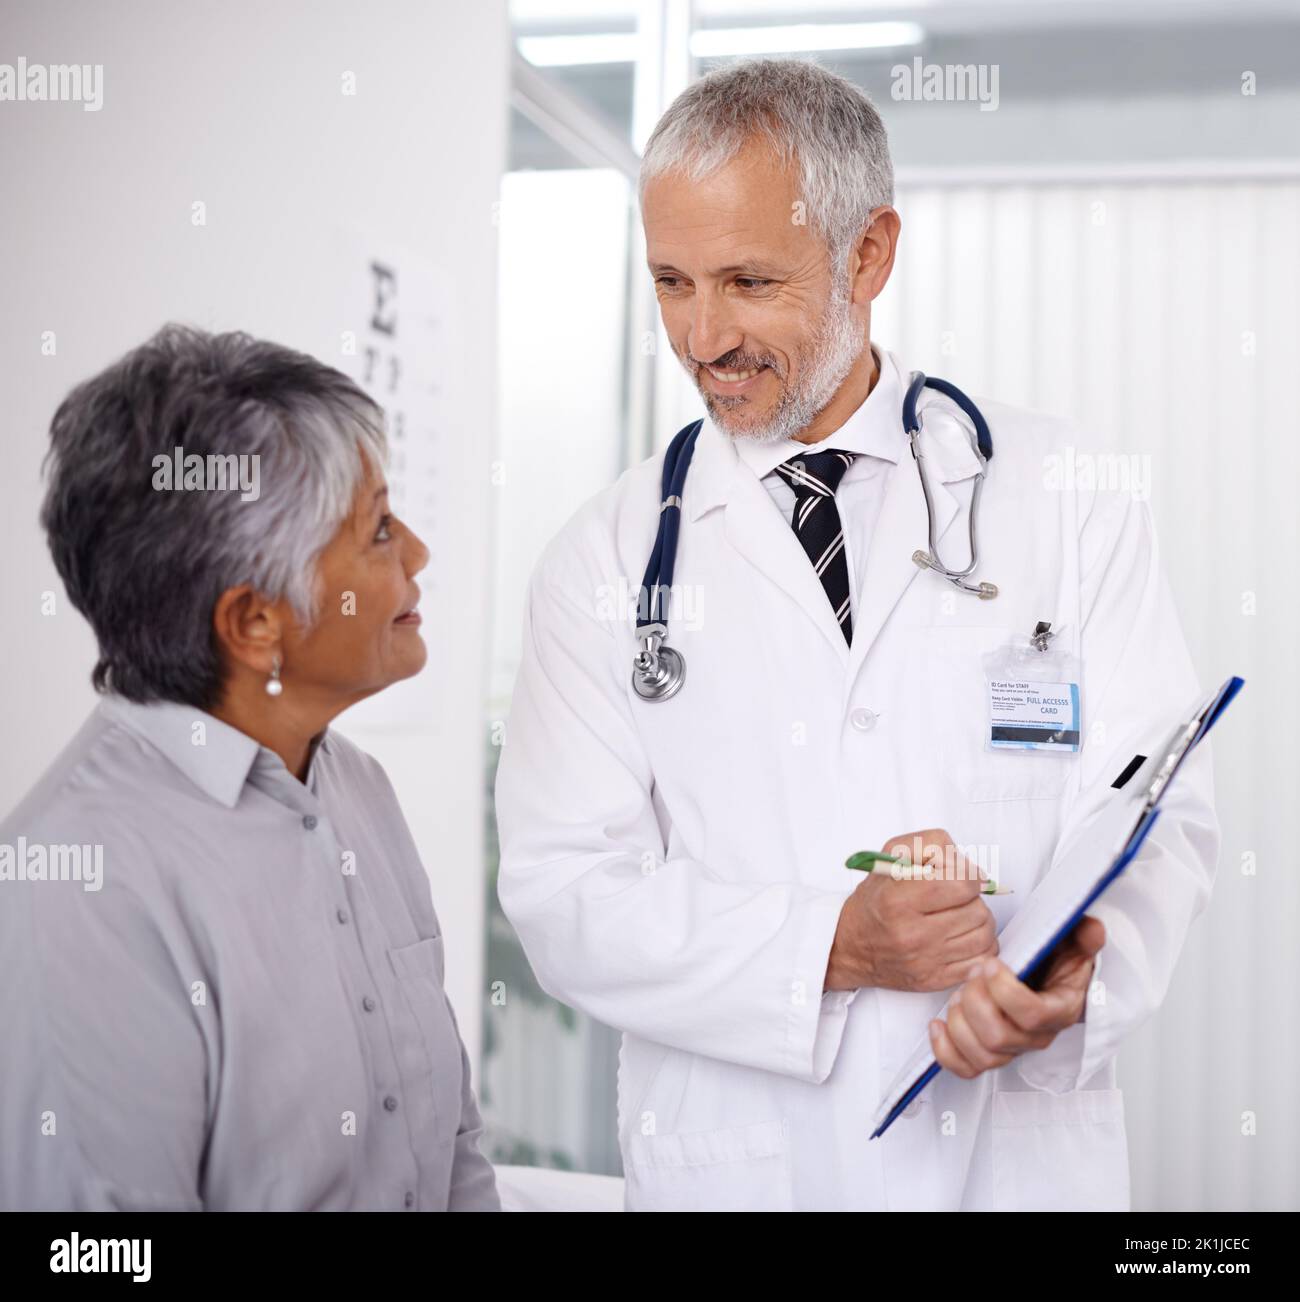 A perfect bill of health. A happy doctor seeing to one of his mature patients. Stock Photo